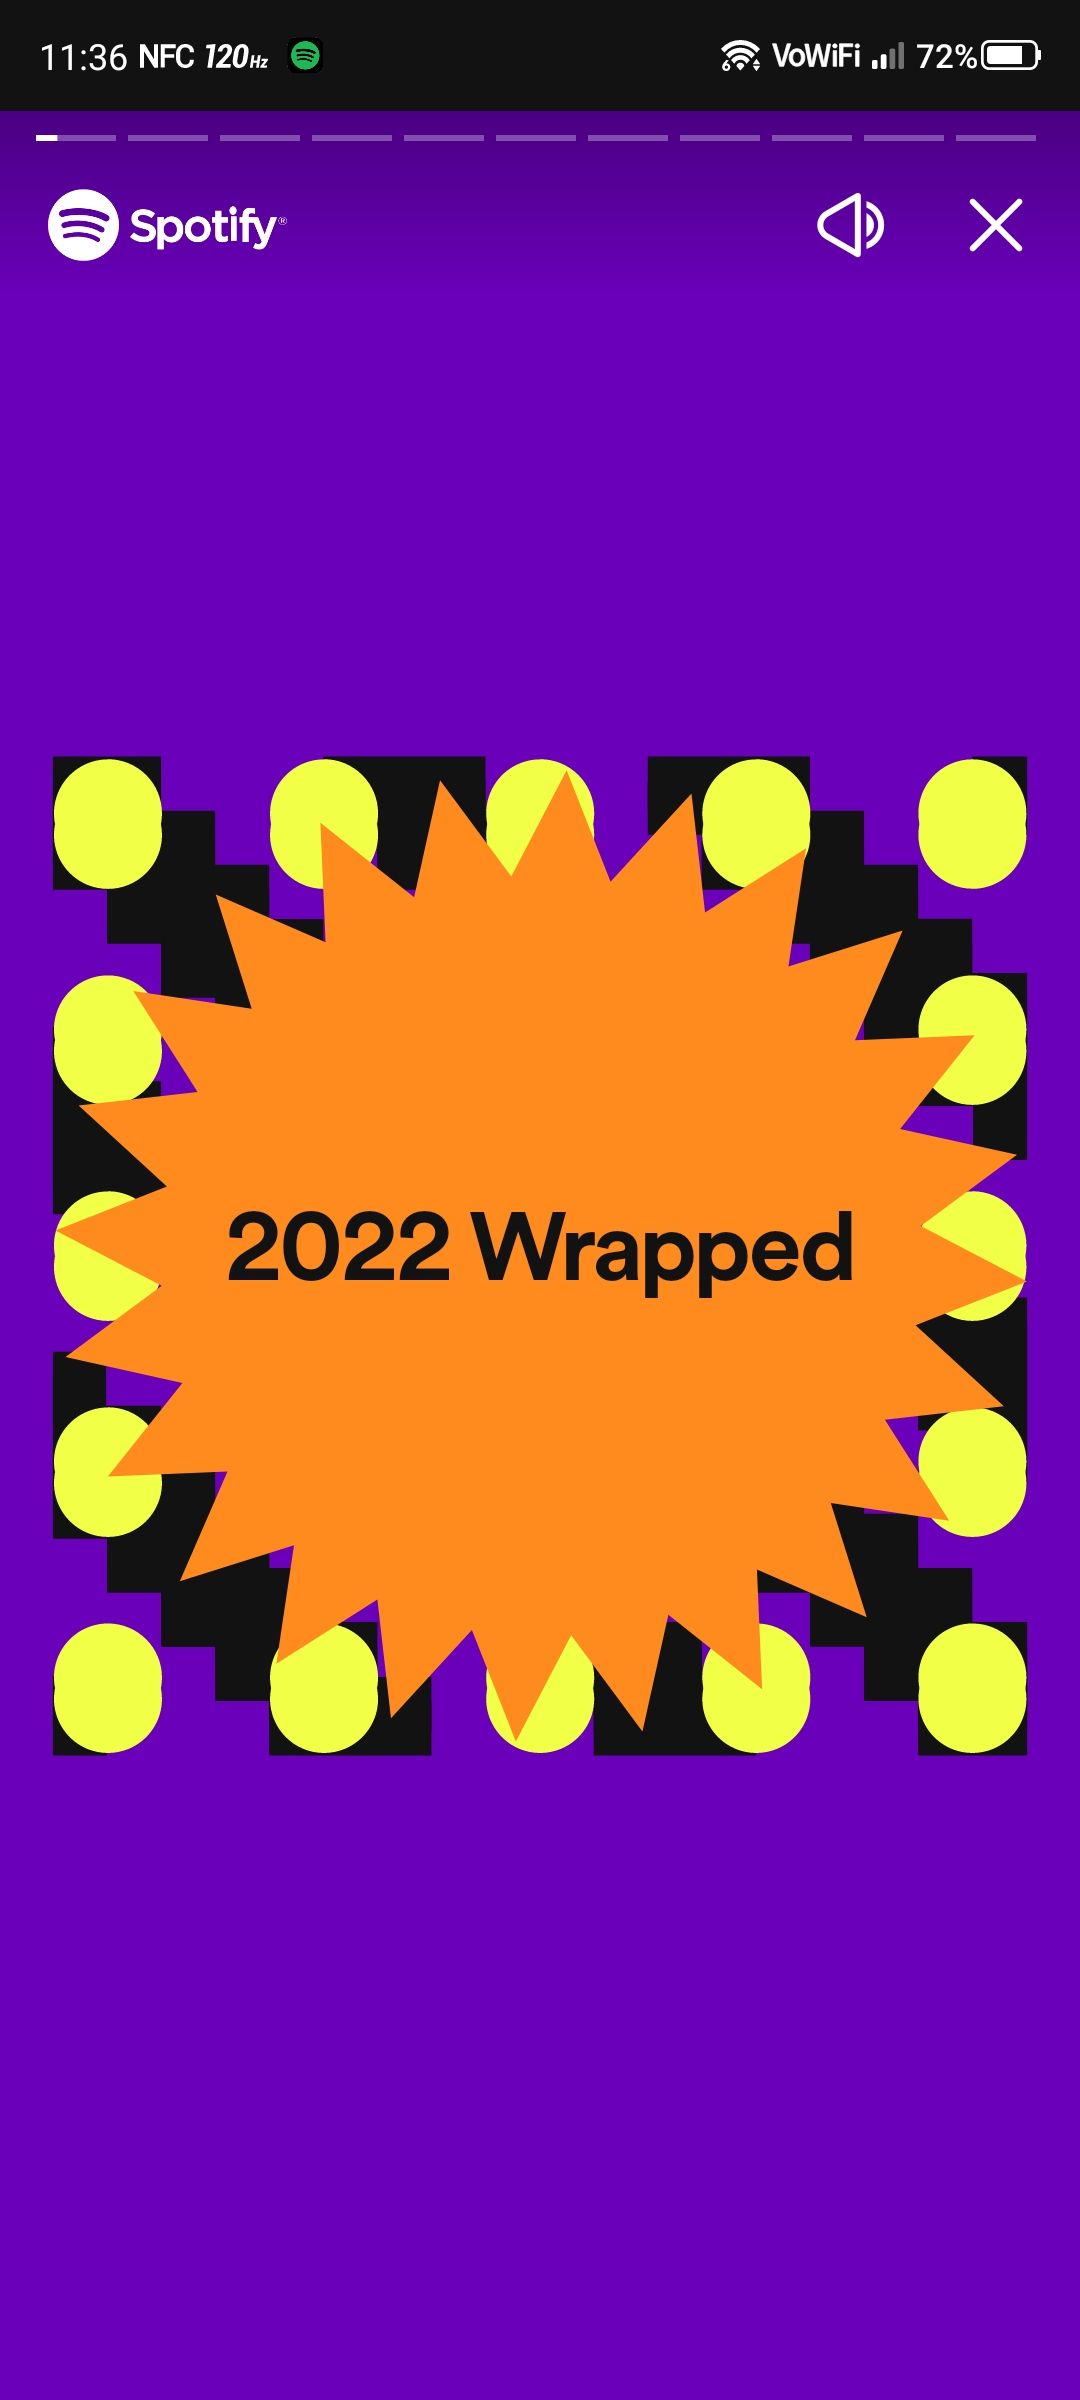 Screenshot of the first screen of 2022 Wrapped in Instagram story style. The screen displays an introduction to the user’s 2022 Wrapped experience on Spotify and features colorful graphics and animations.